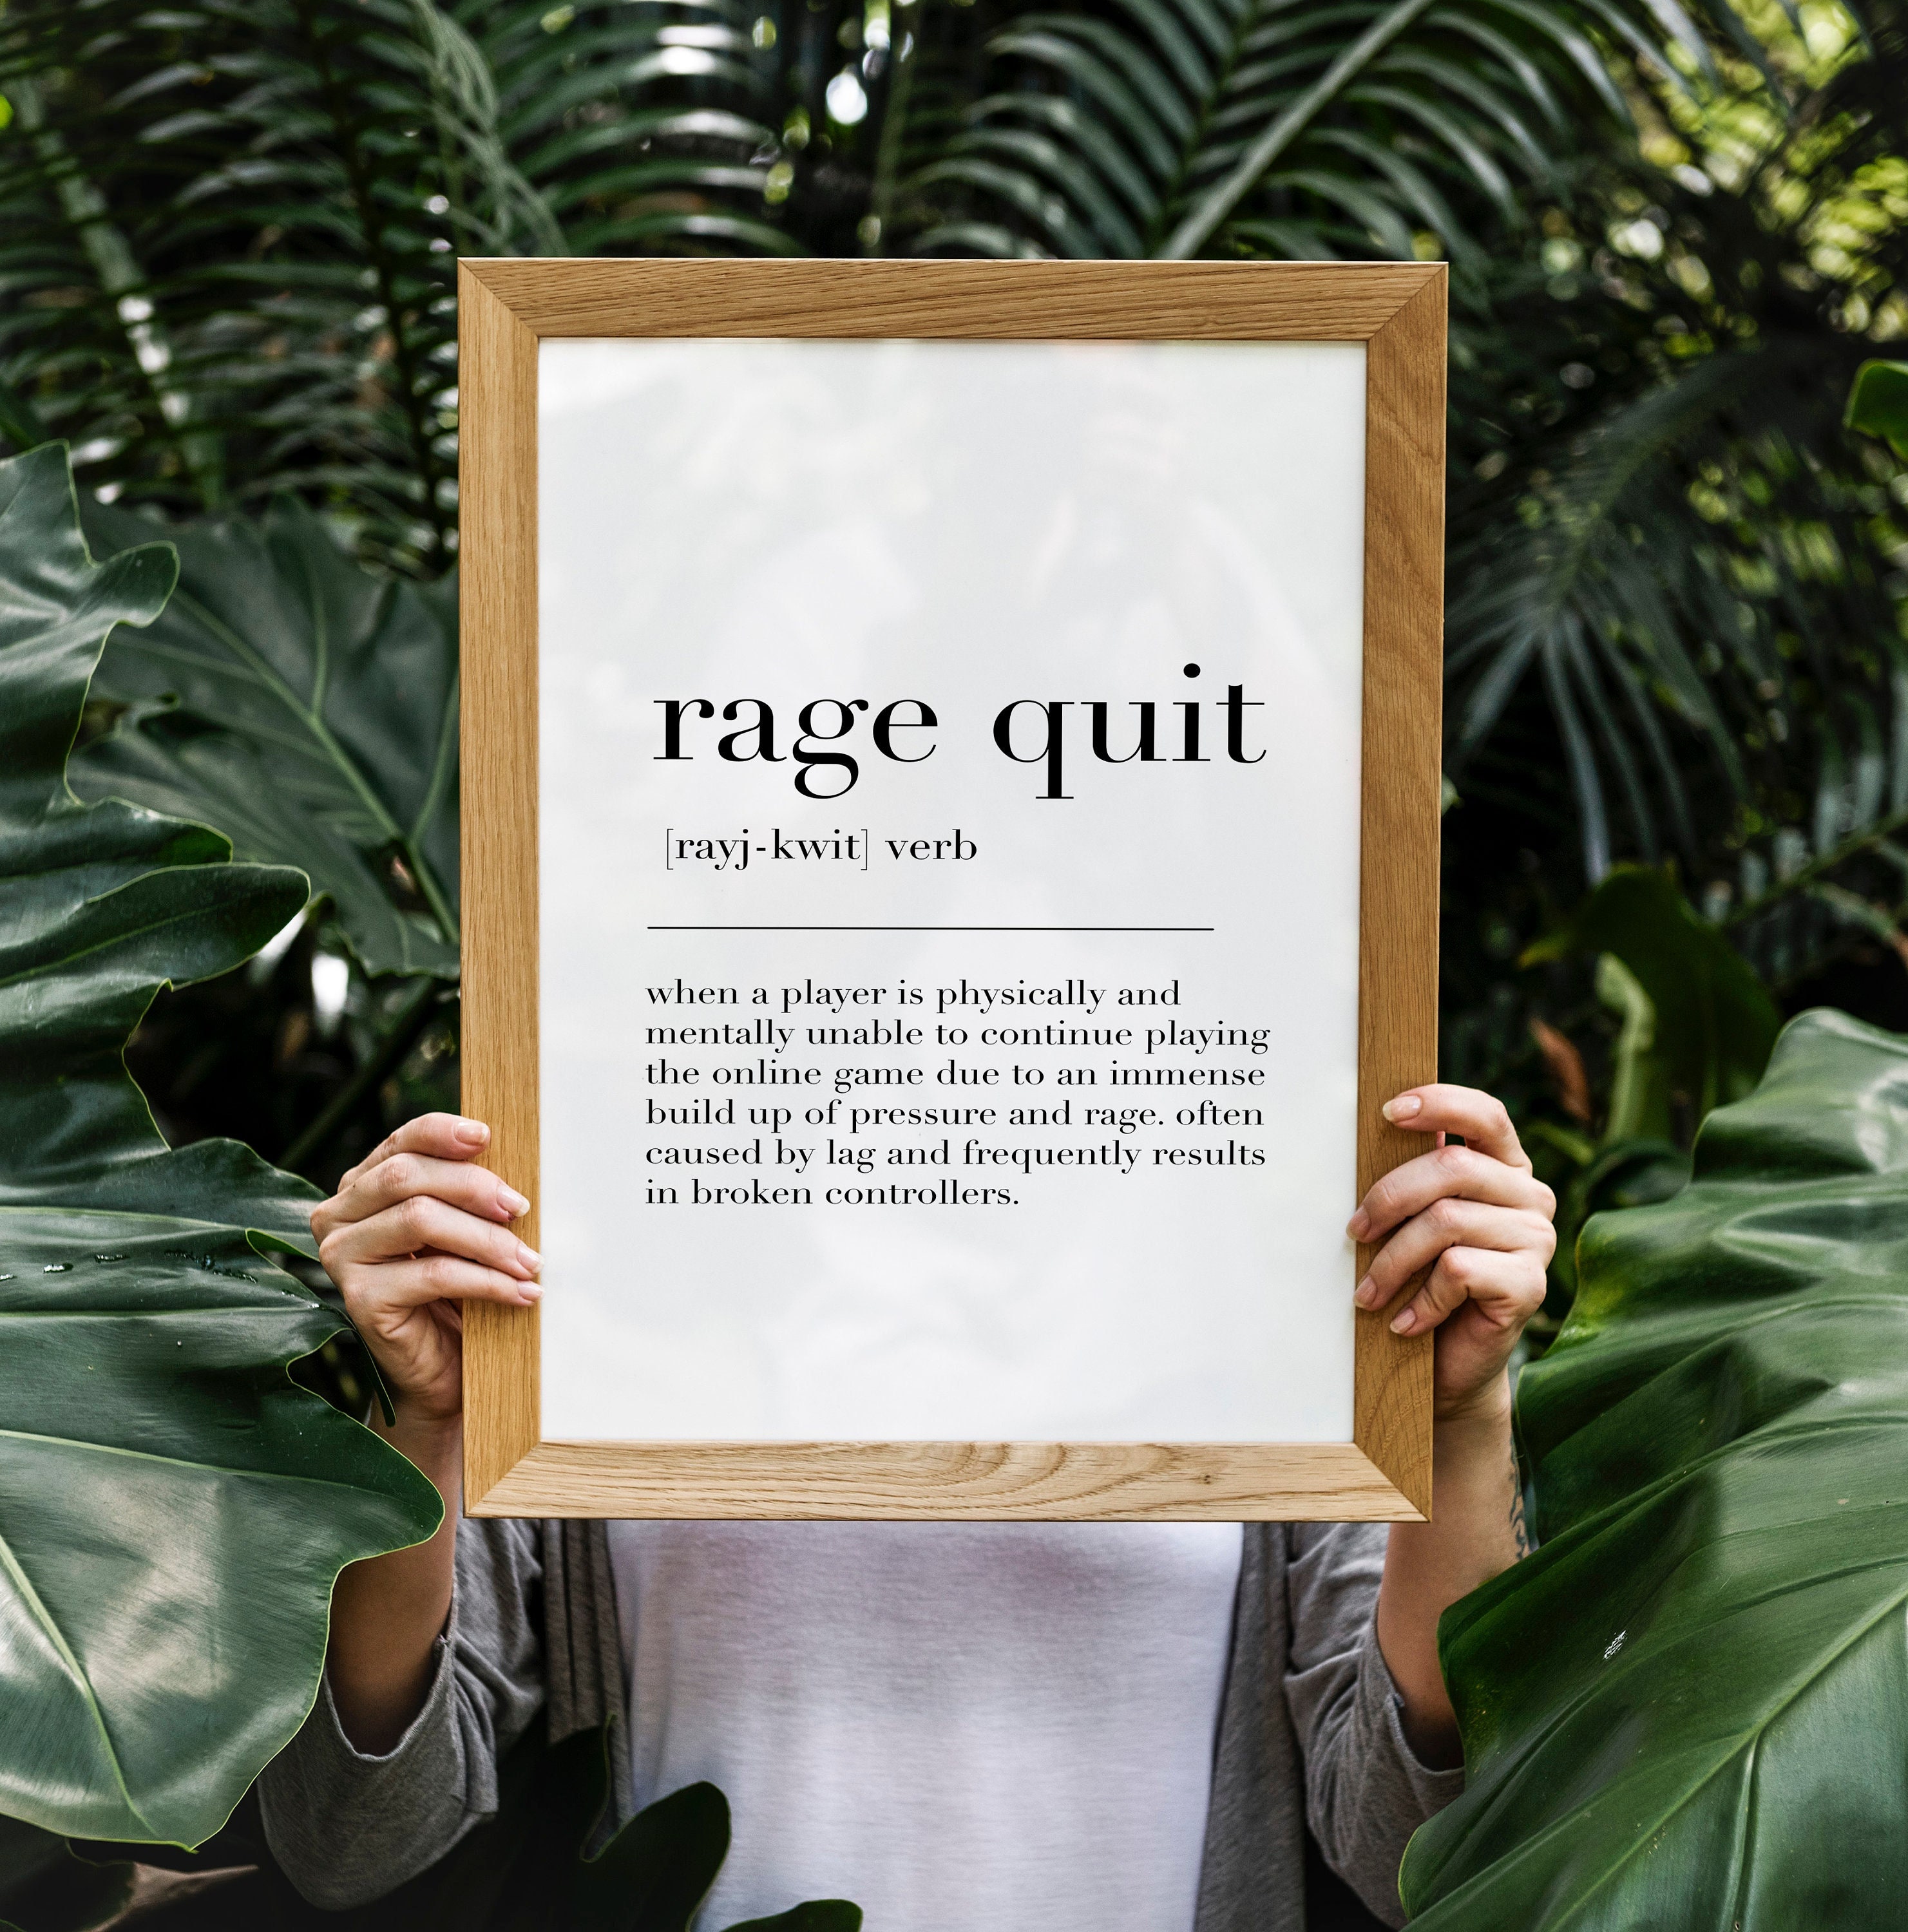 Rage Quit Game - Rage Quit Definition, Gaming Zoom gifts Poster